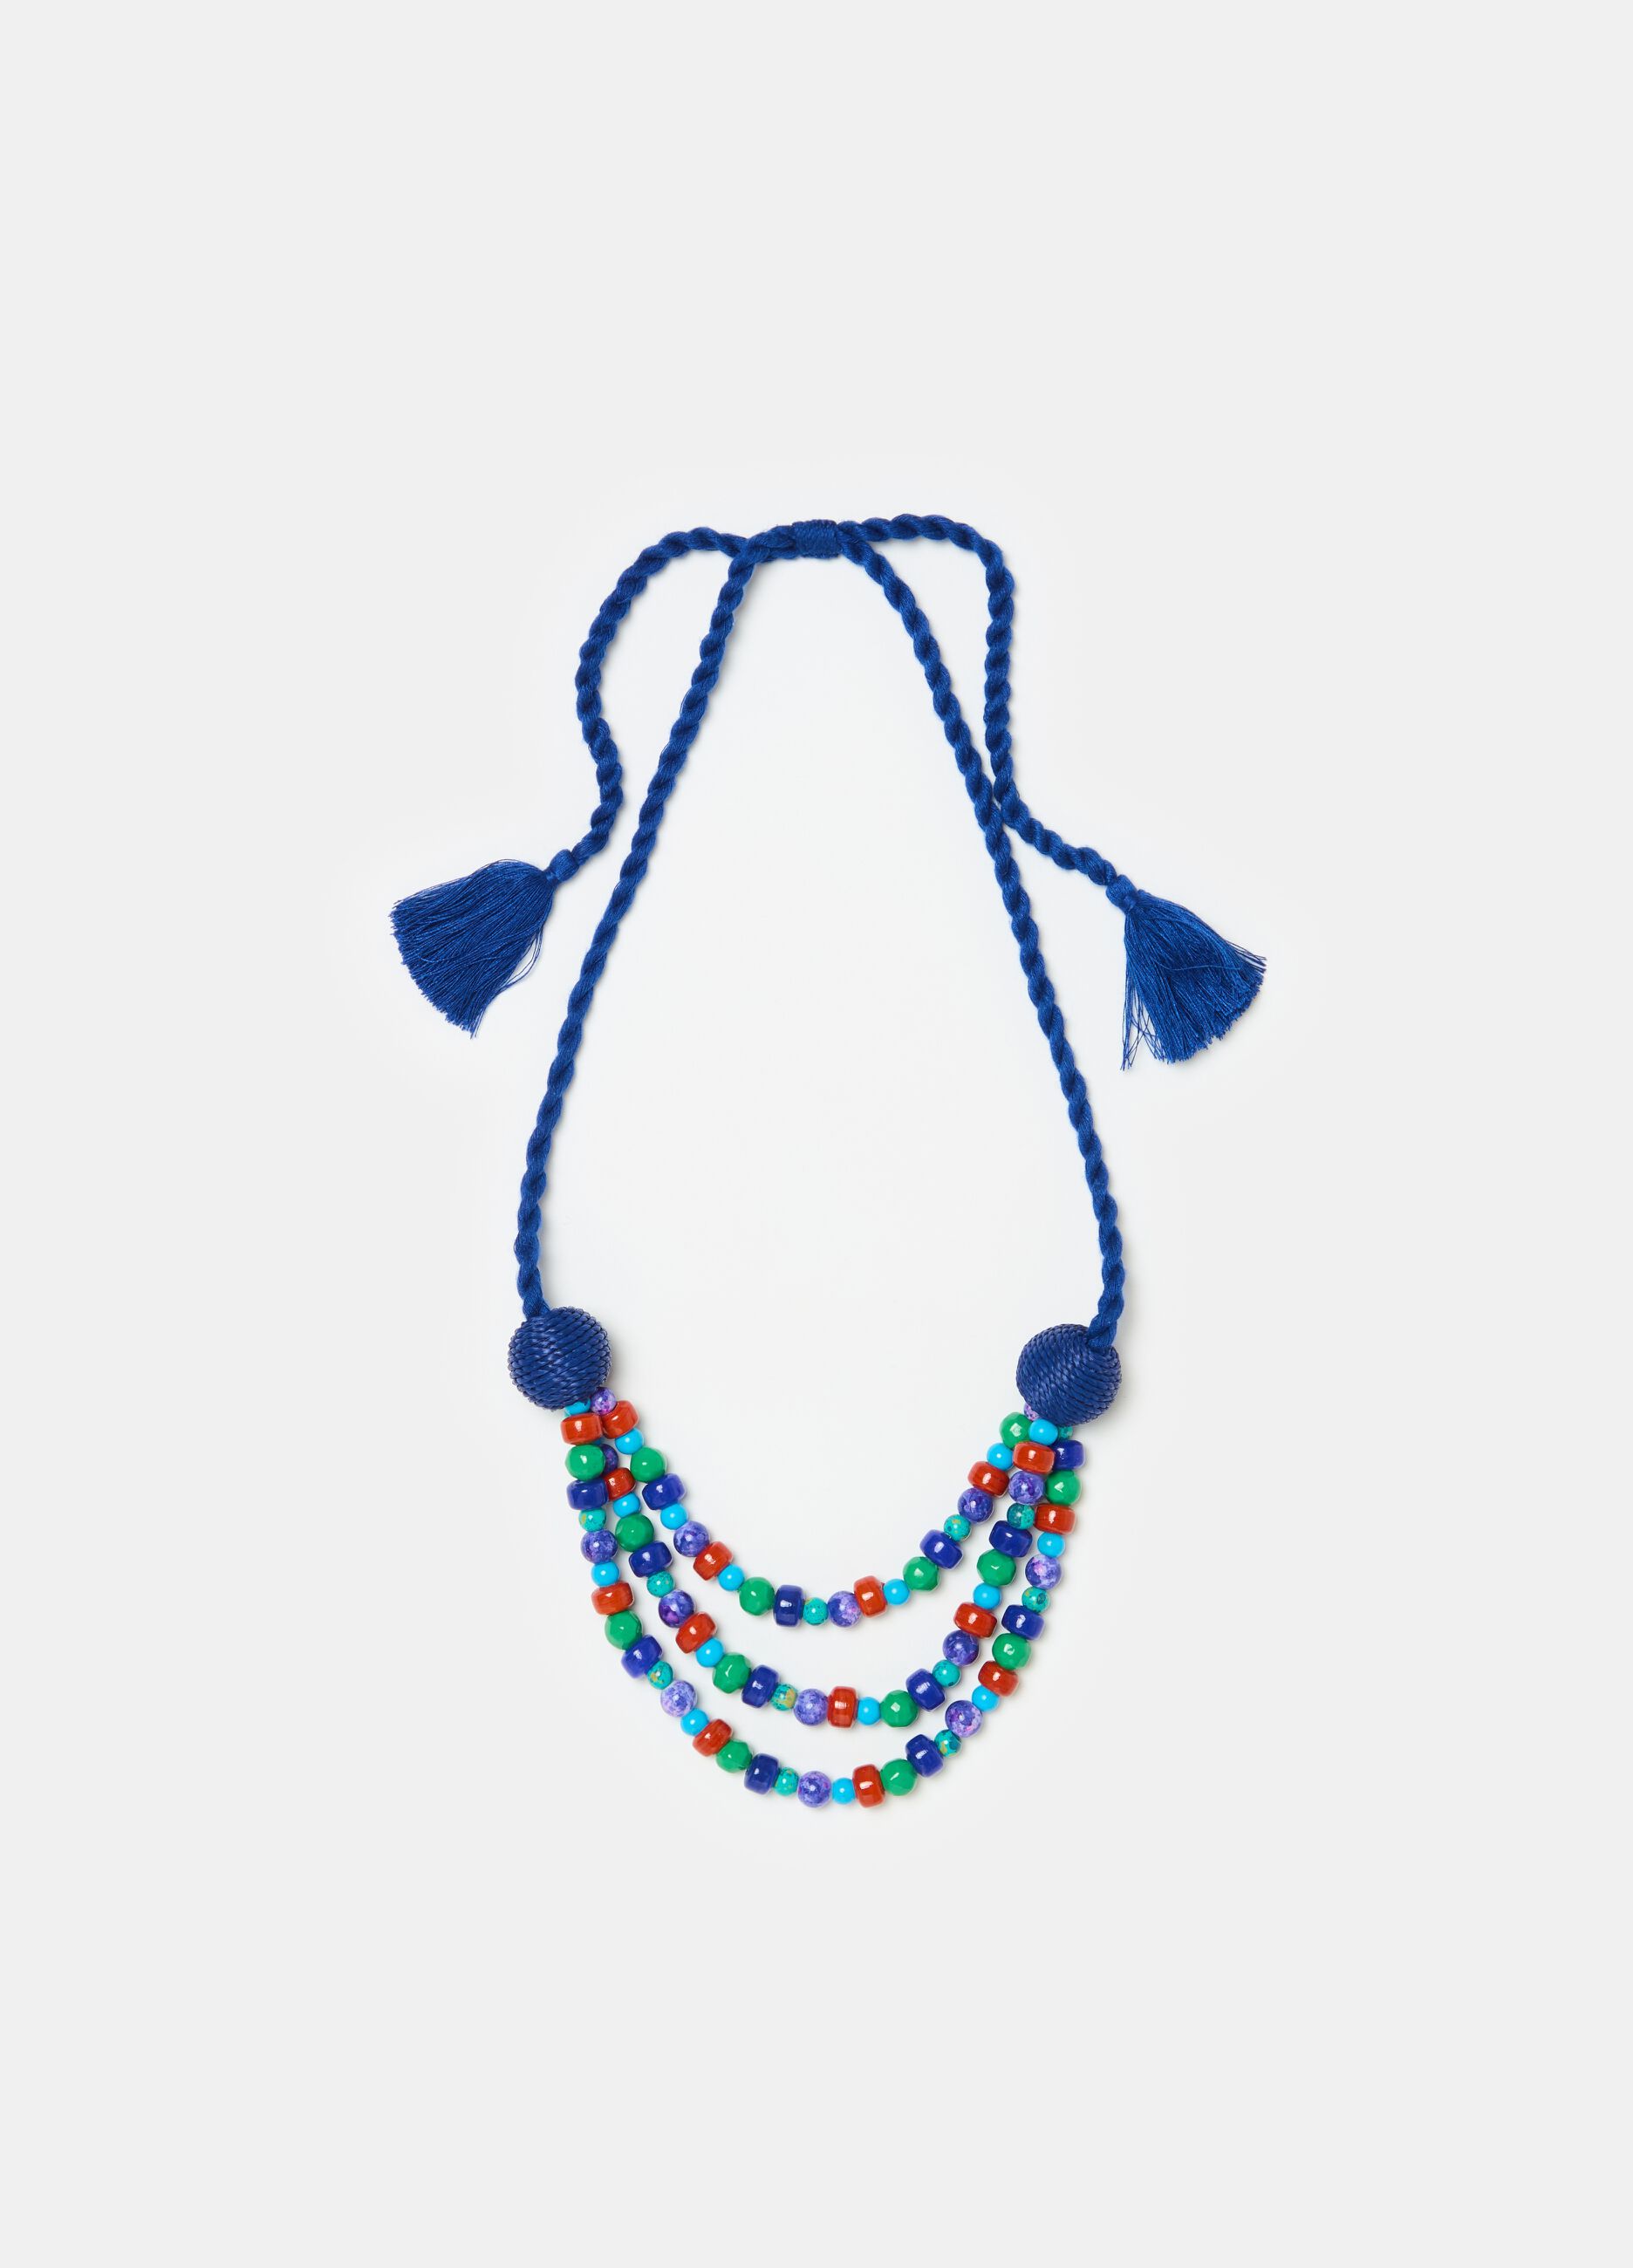 Necklace with colourful gems and cord